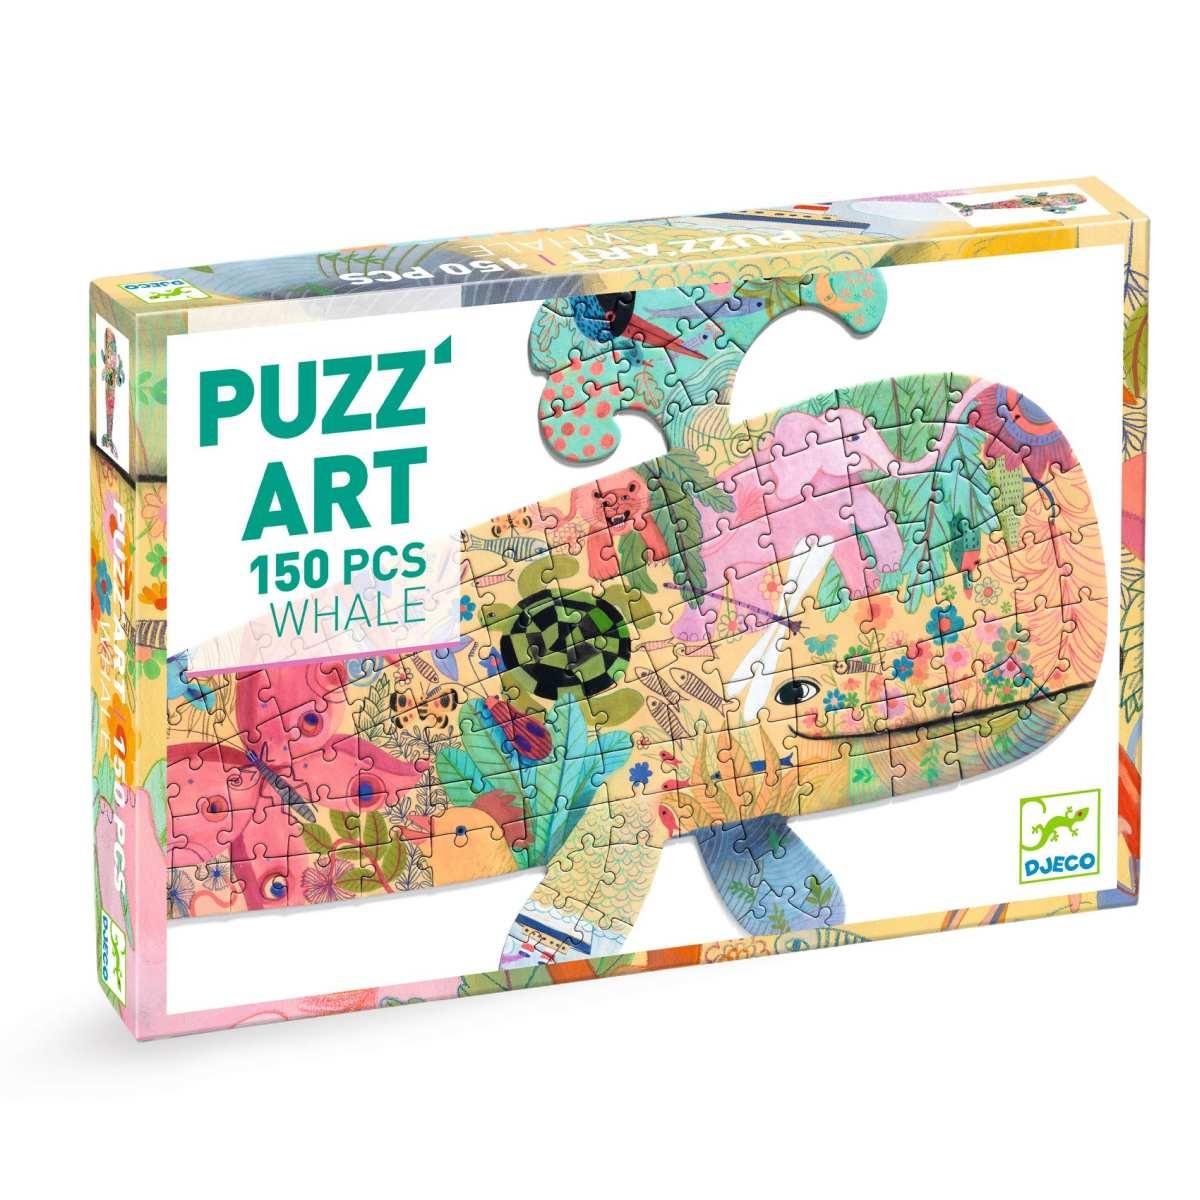 DJECO Puzzle Puzz'Art Wal - 150 Teile